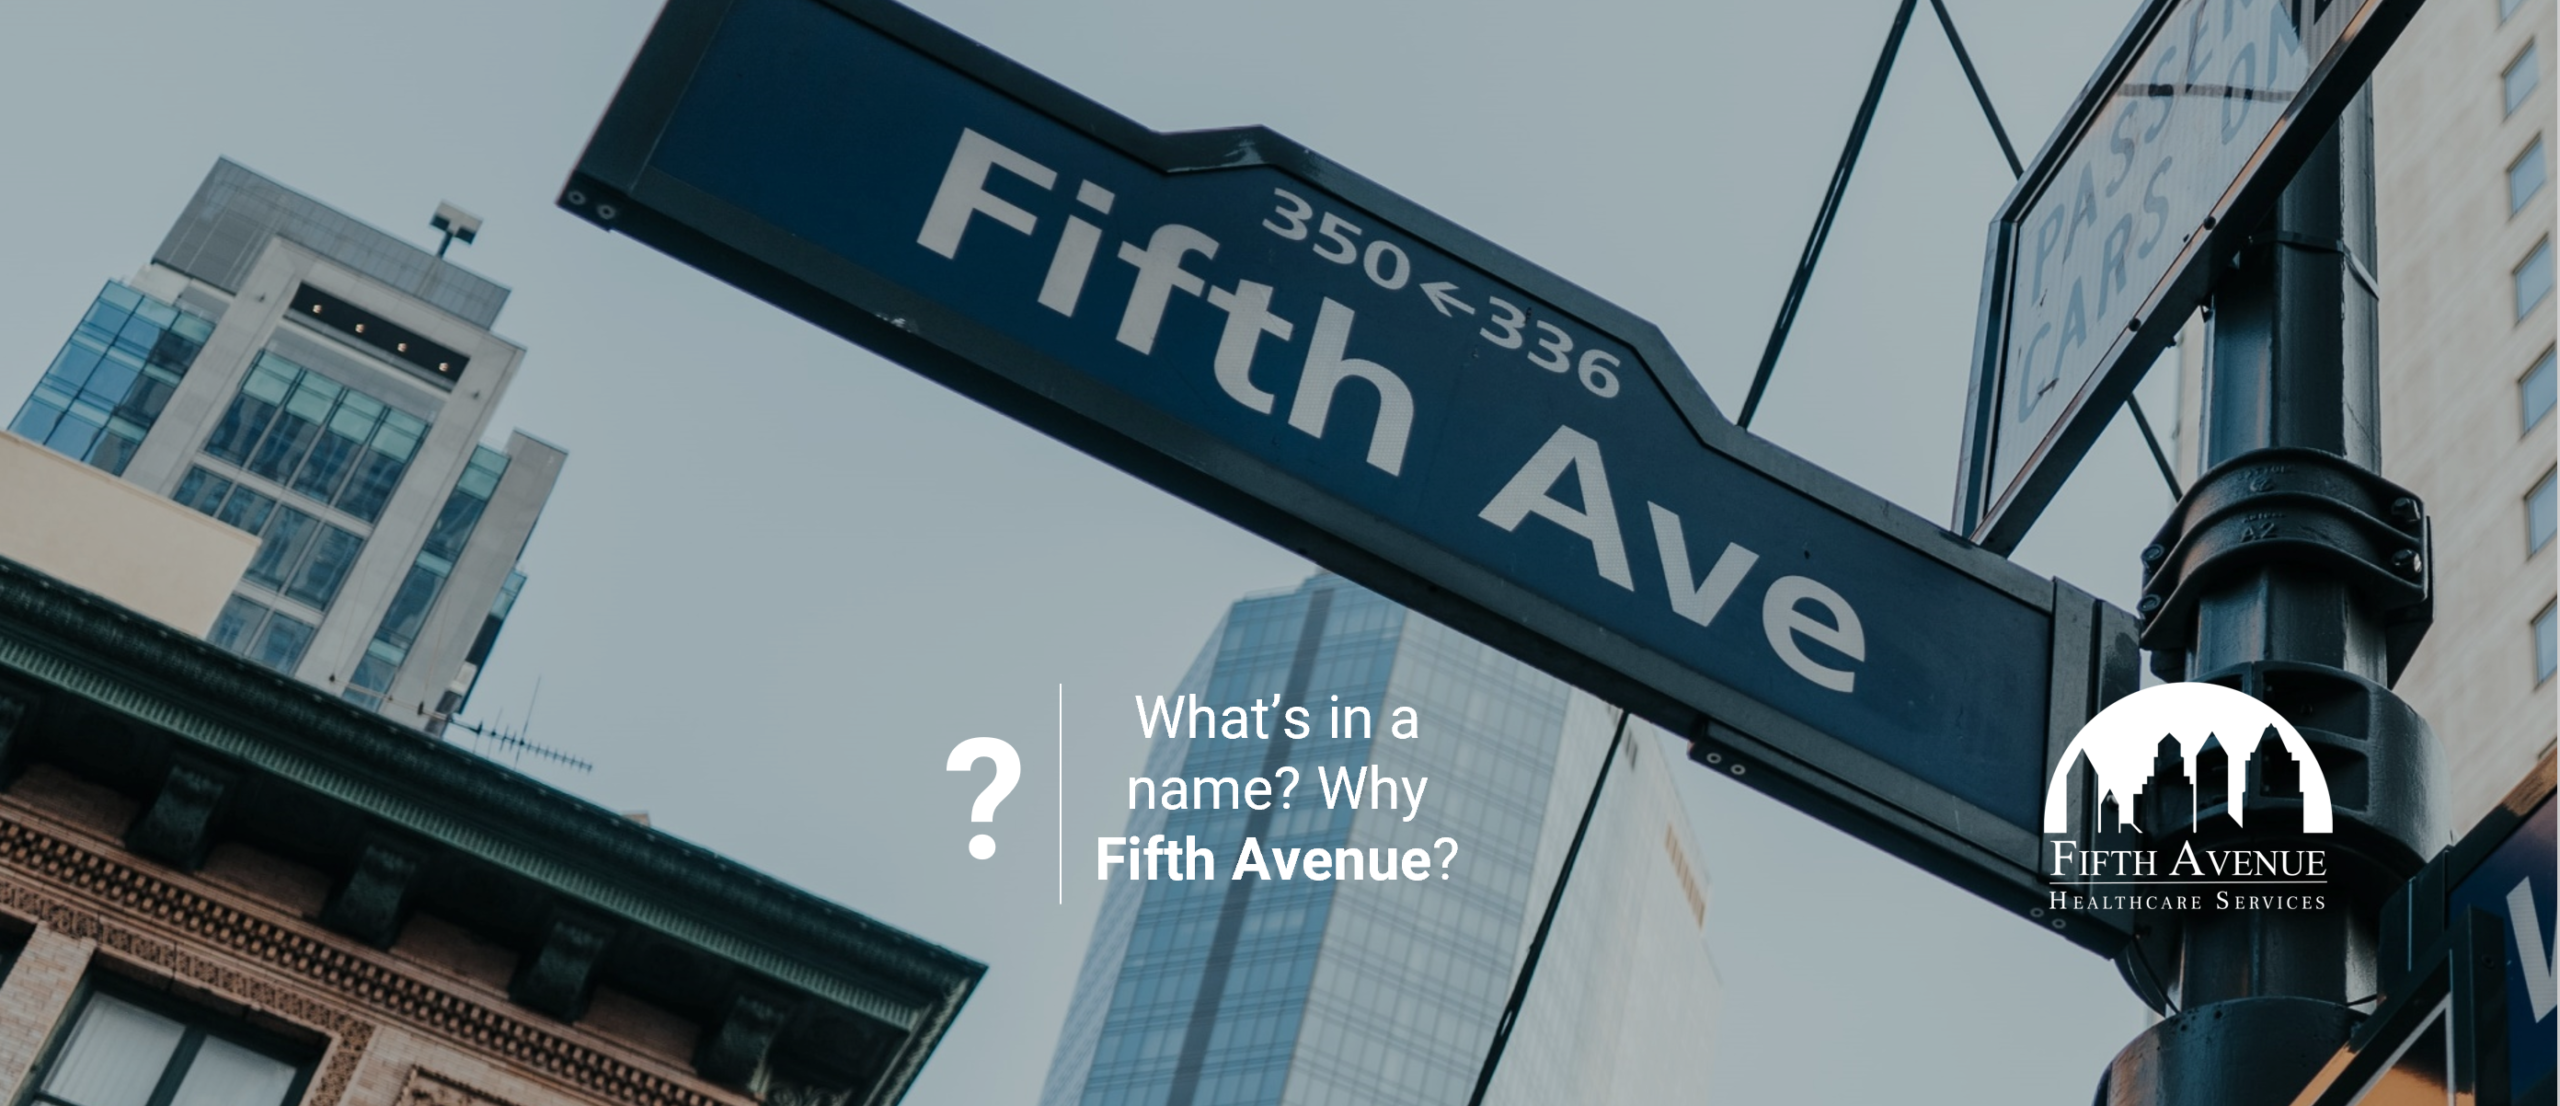 What does Fifth Avenue refer to in our name Fifth Avenue Healthcare Services?